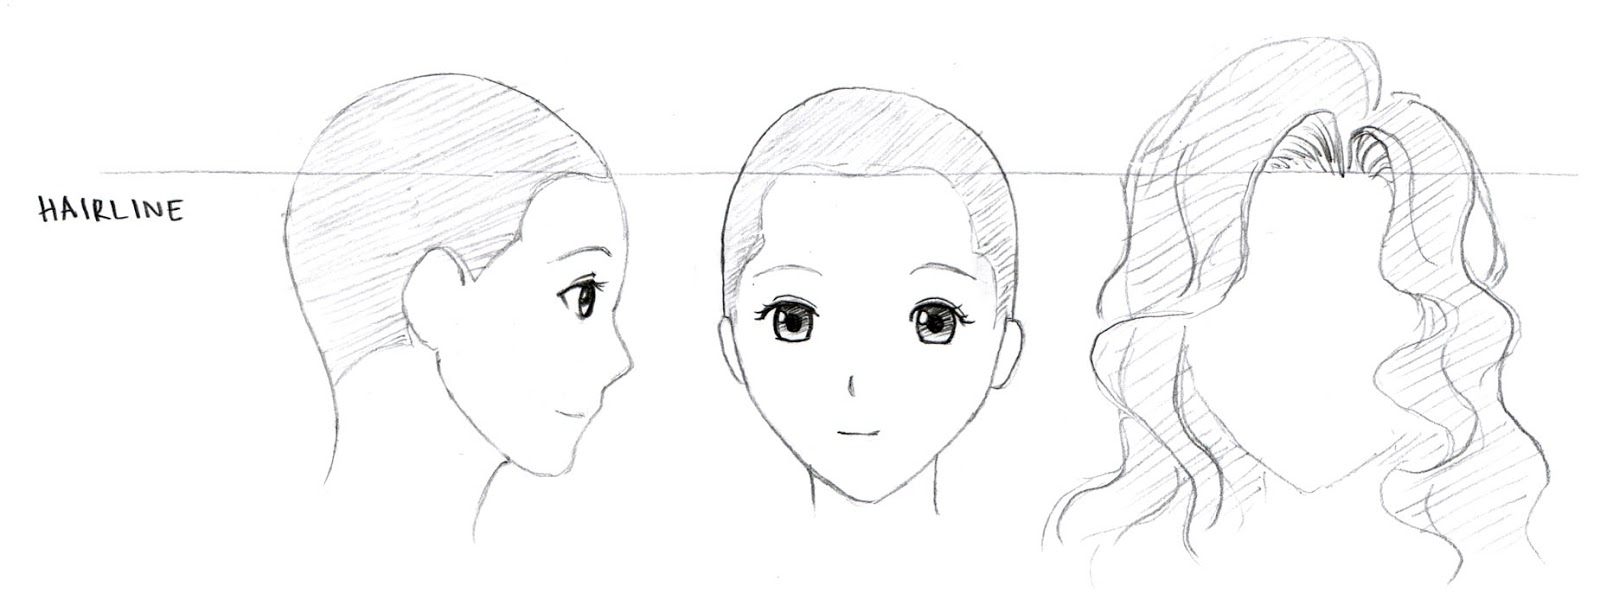 How to draw anime girl's hair (part-1) 